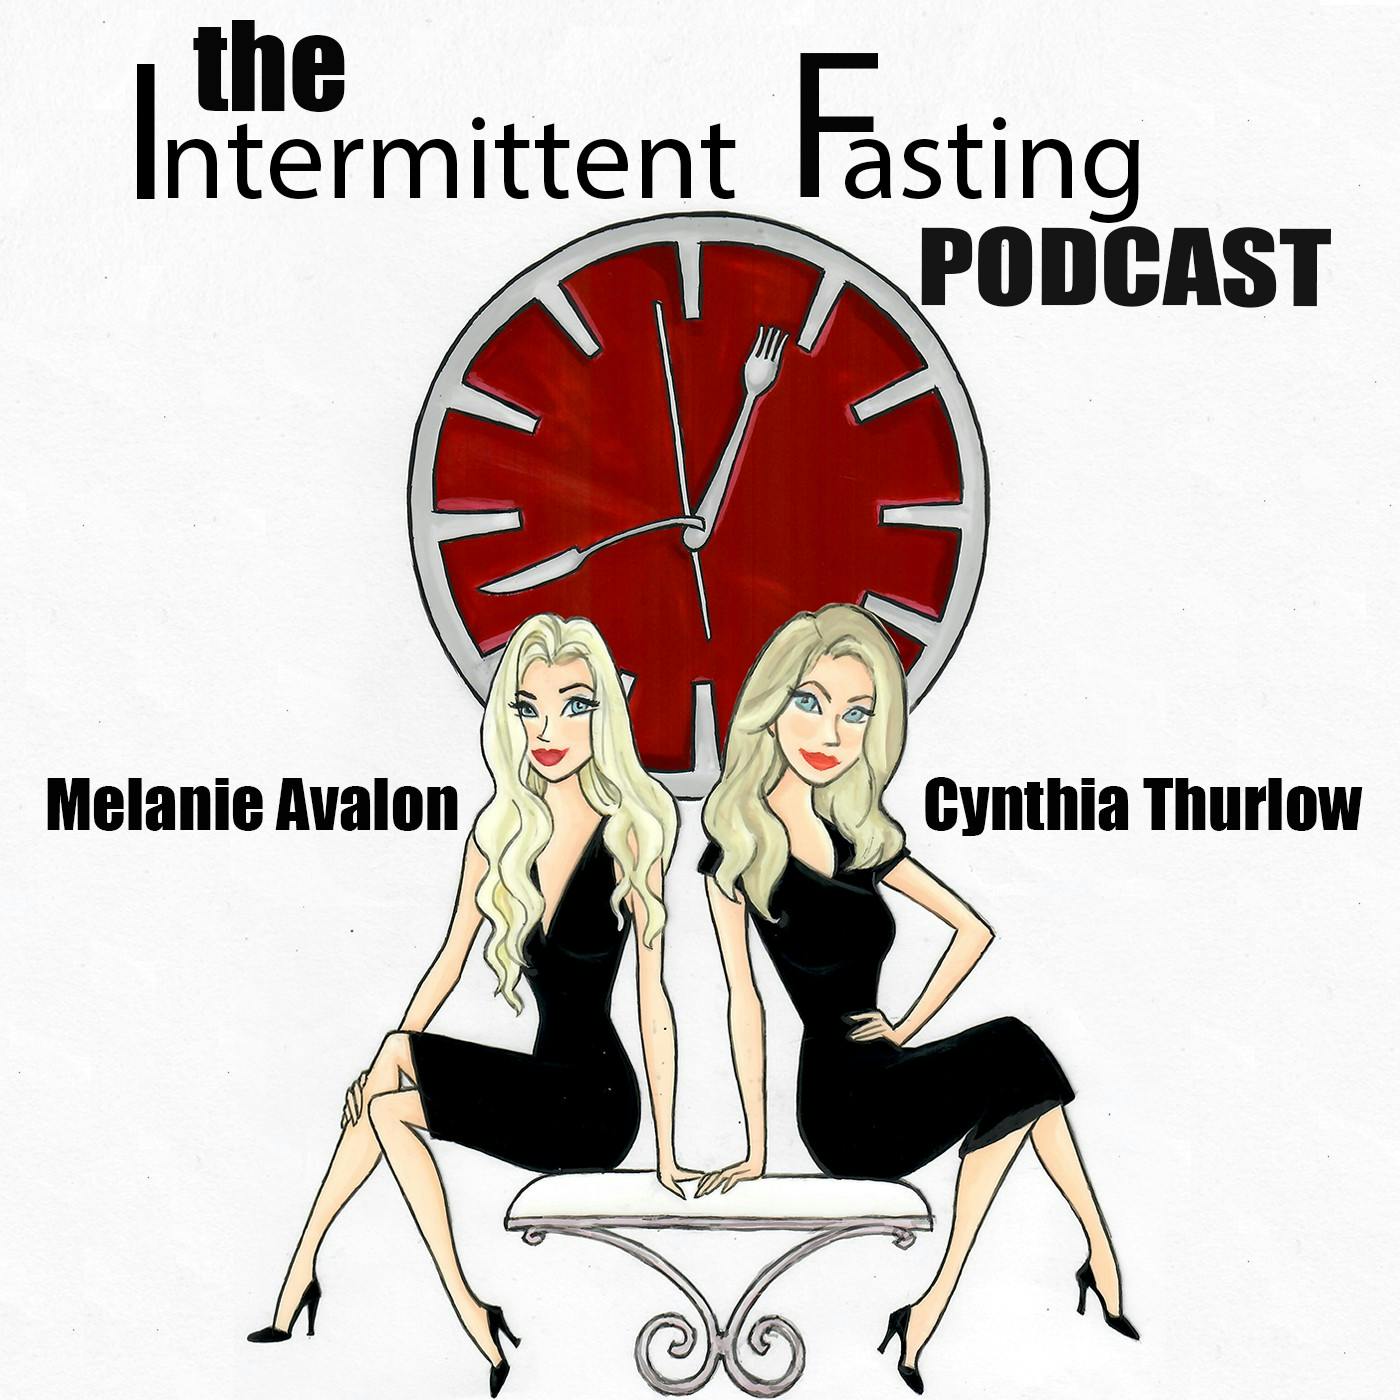 The Intermittent Fasting Podcast